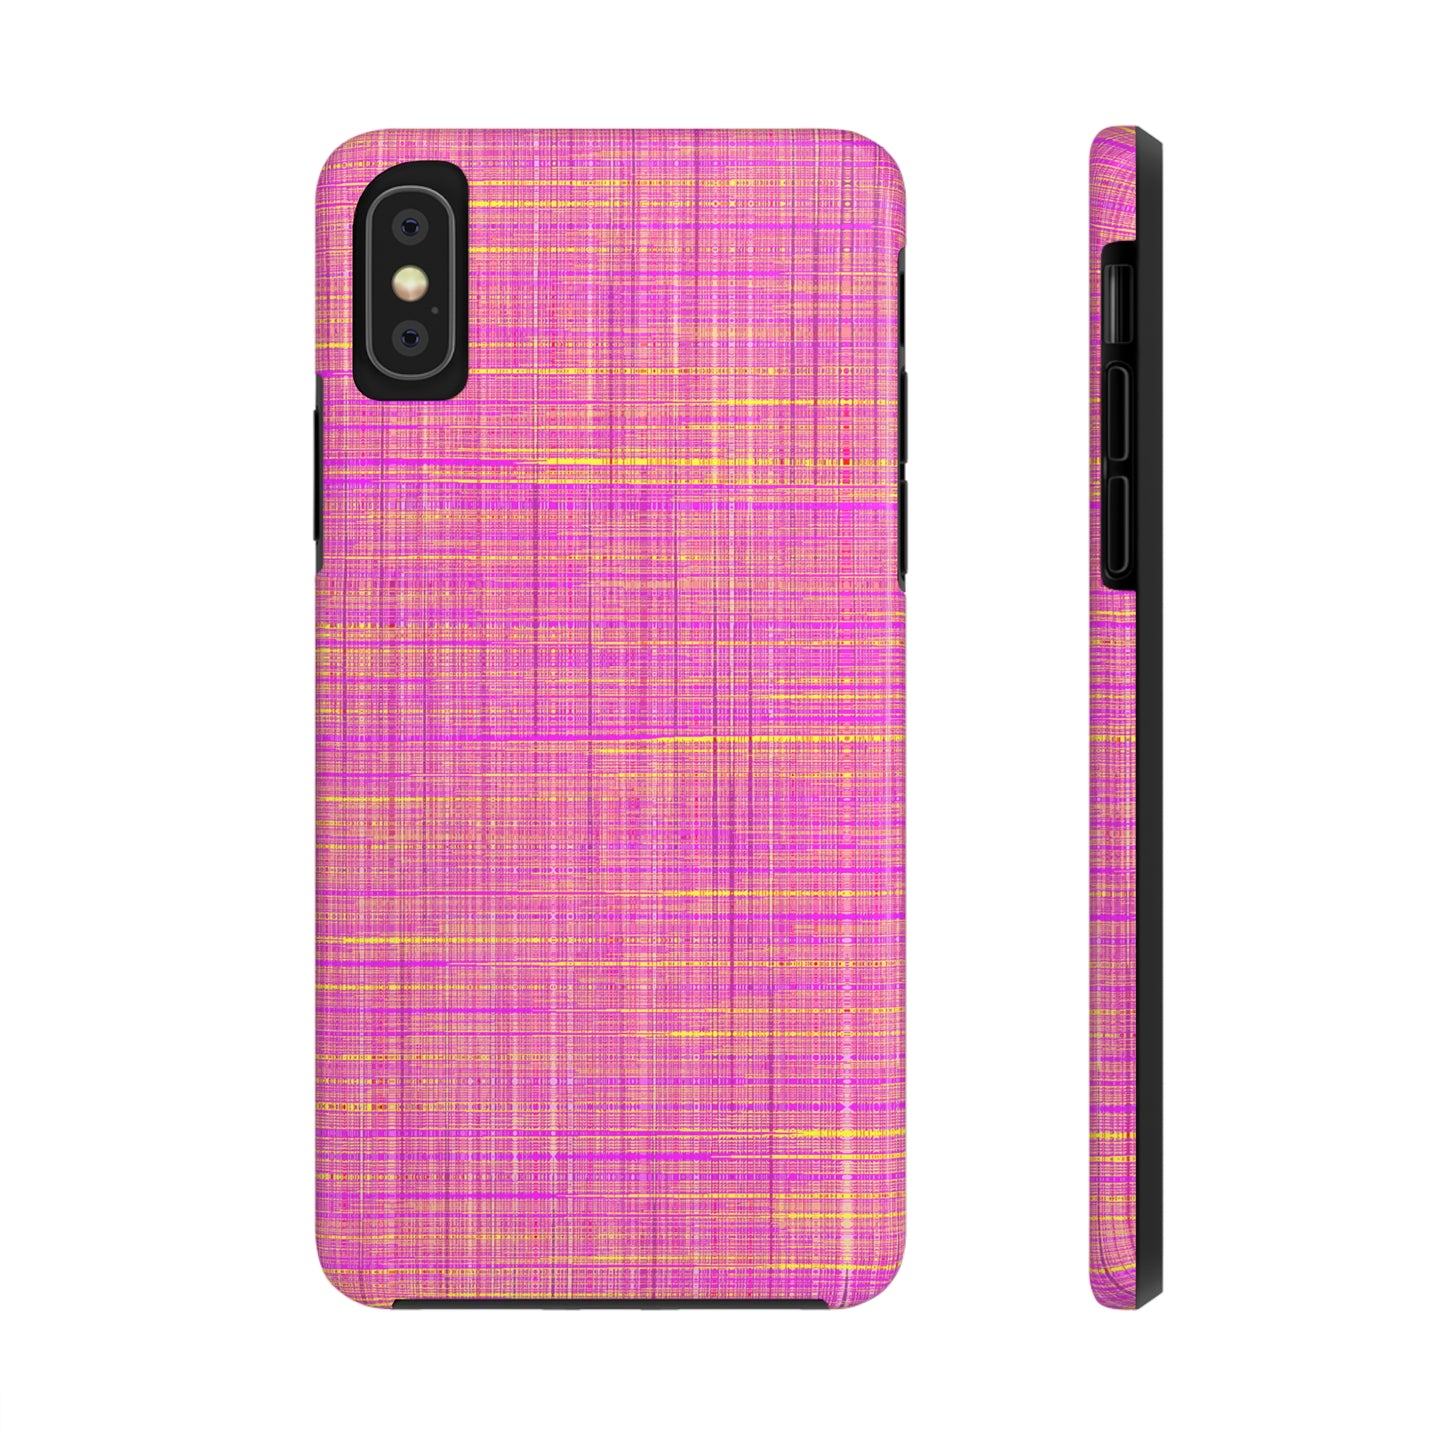 Woven Fabric Phone Case